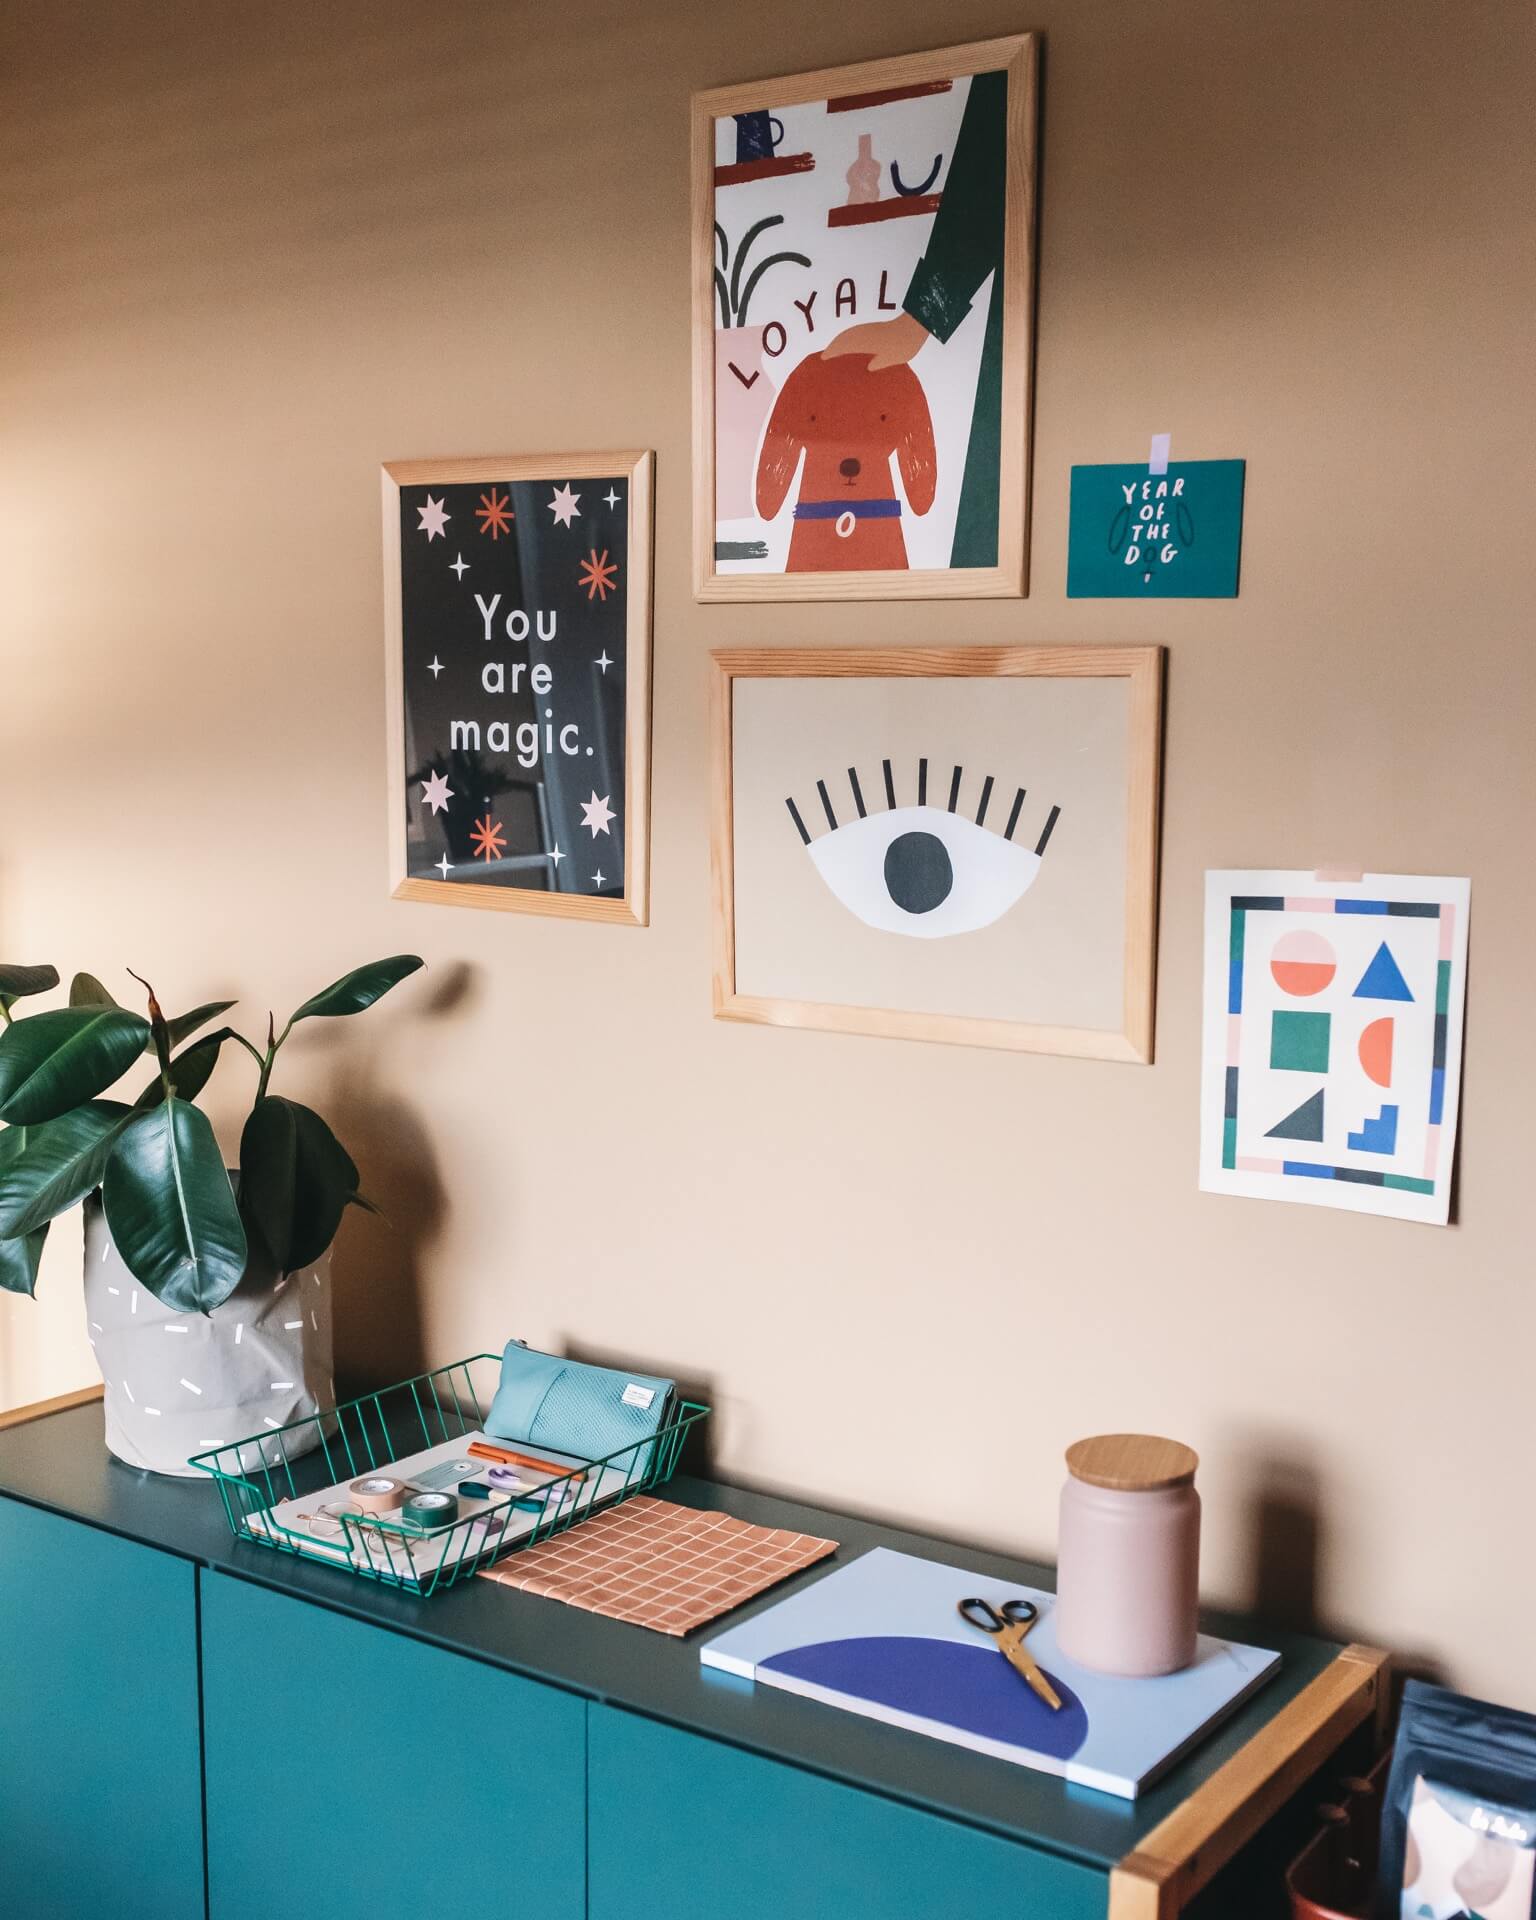 Peach coloured walls and artwork in the creative home studio of illustrator Abbey Withington